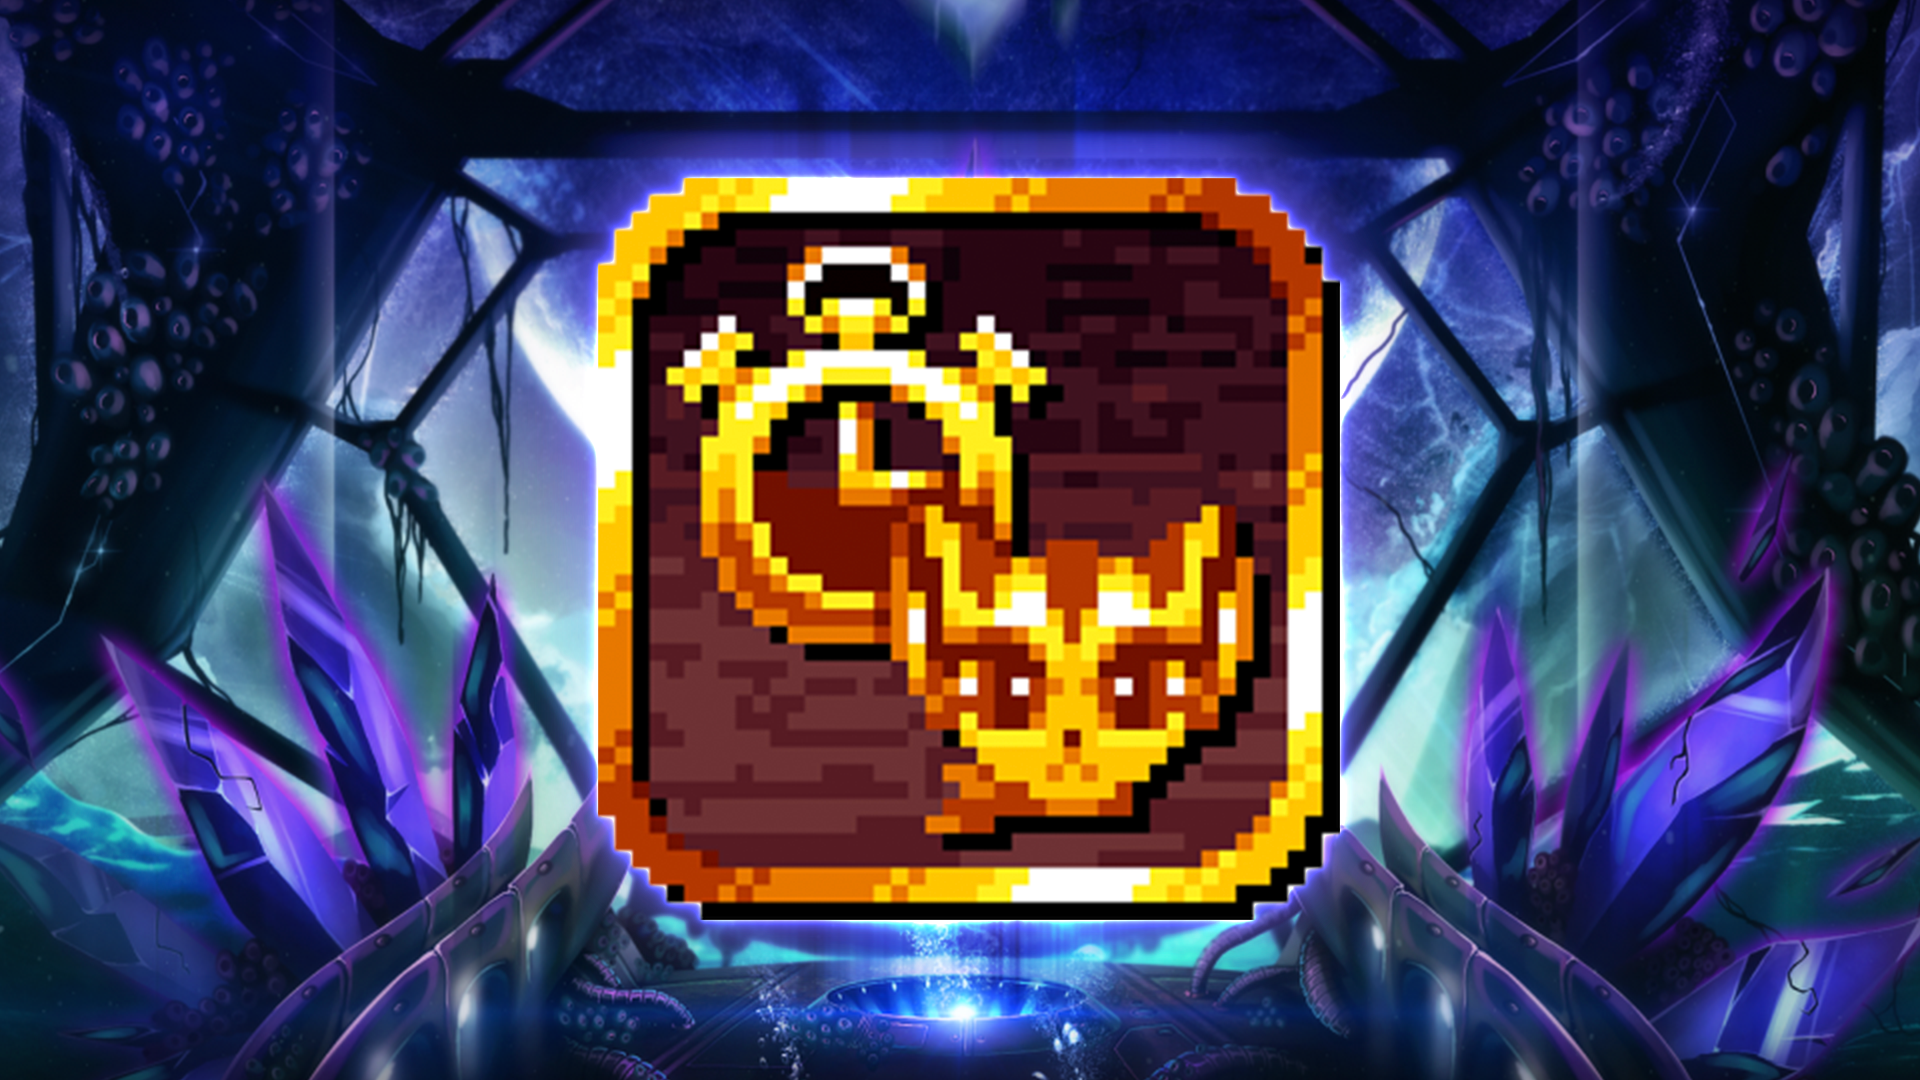 Icon for Wildcat Master